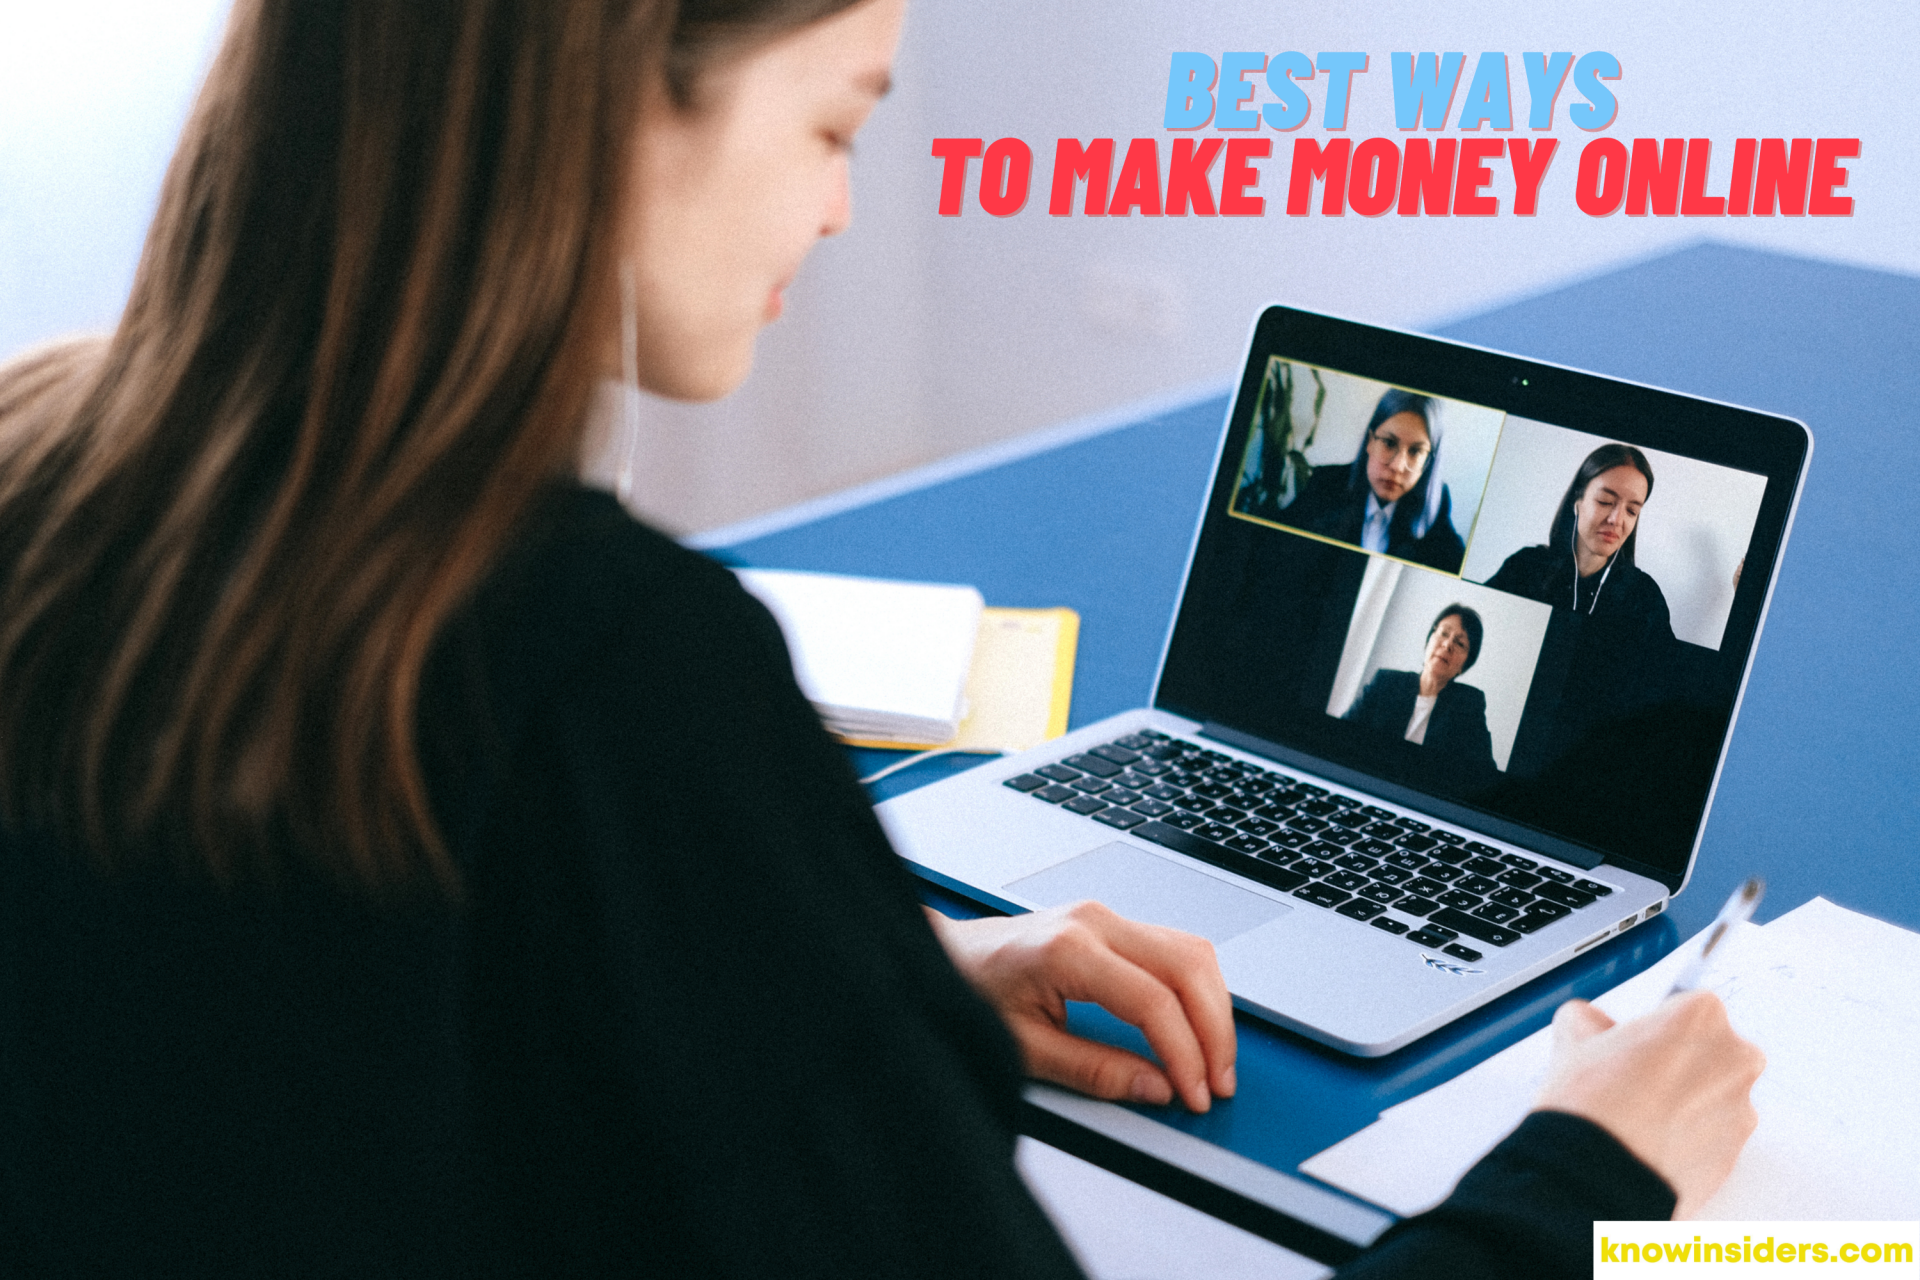 How to Make Money Online In 2021/22: 10 Realistic Ways